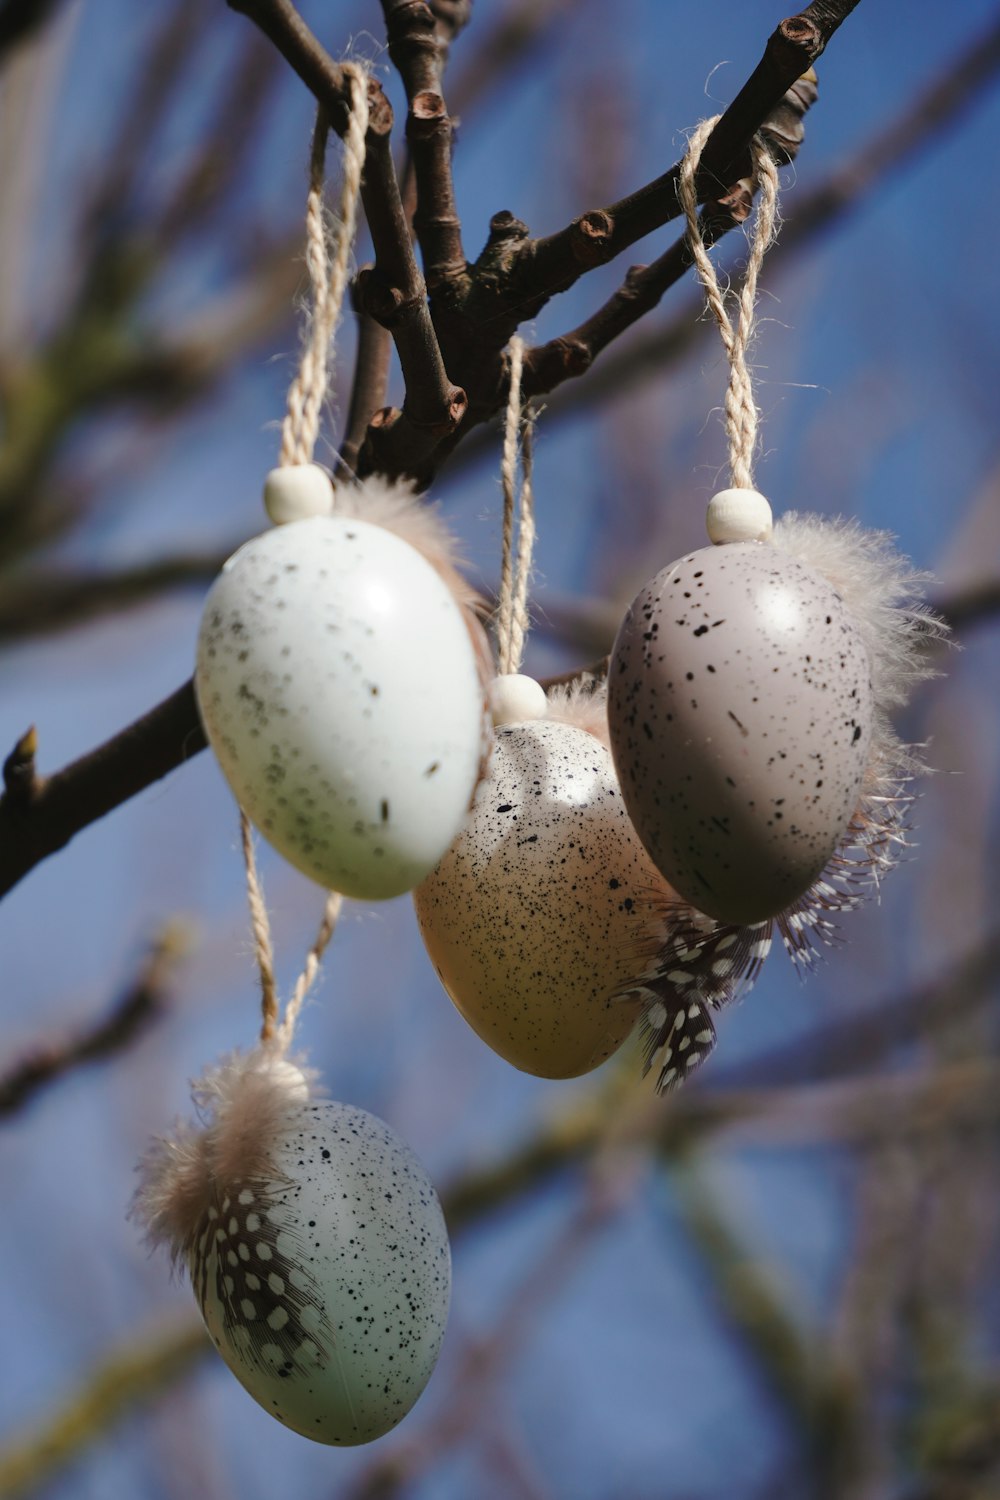 a group of ornaments hanging from a tree branch